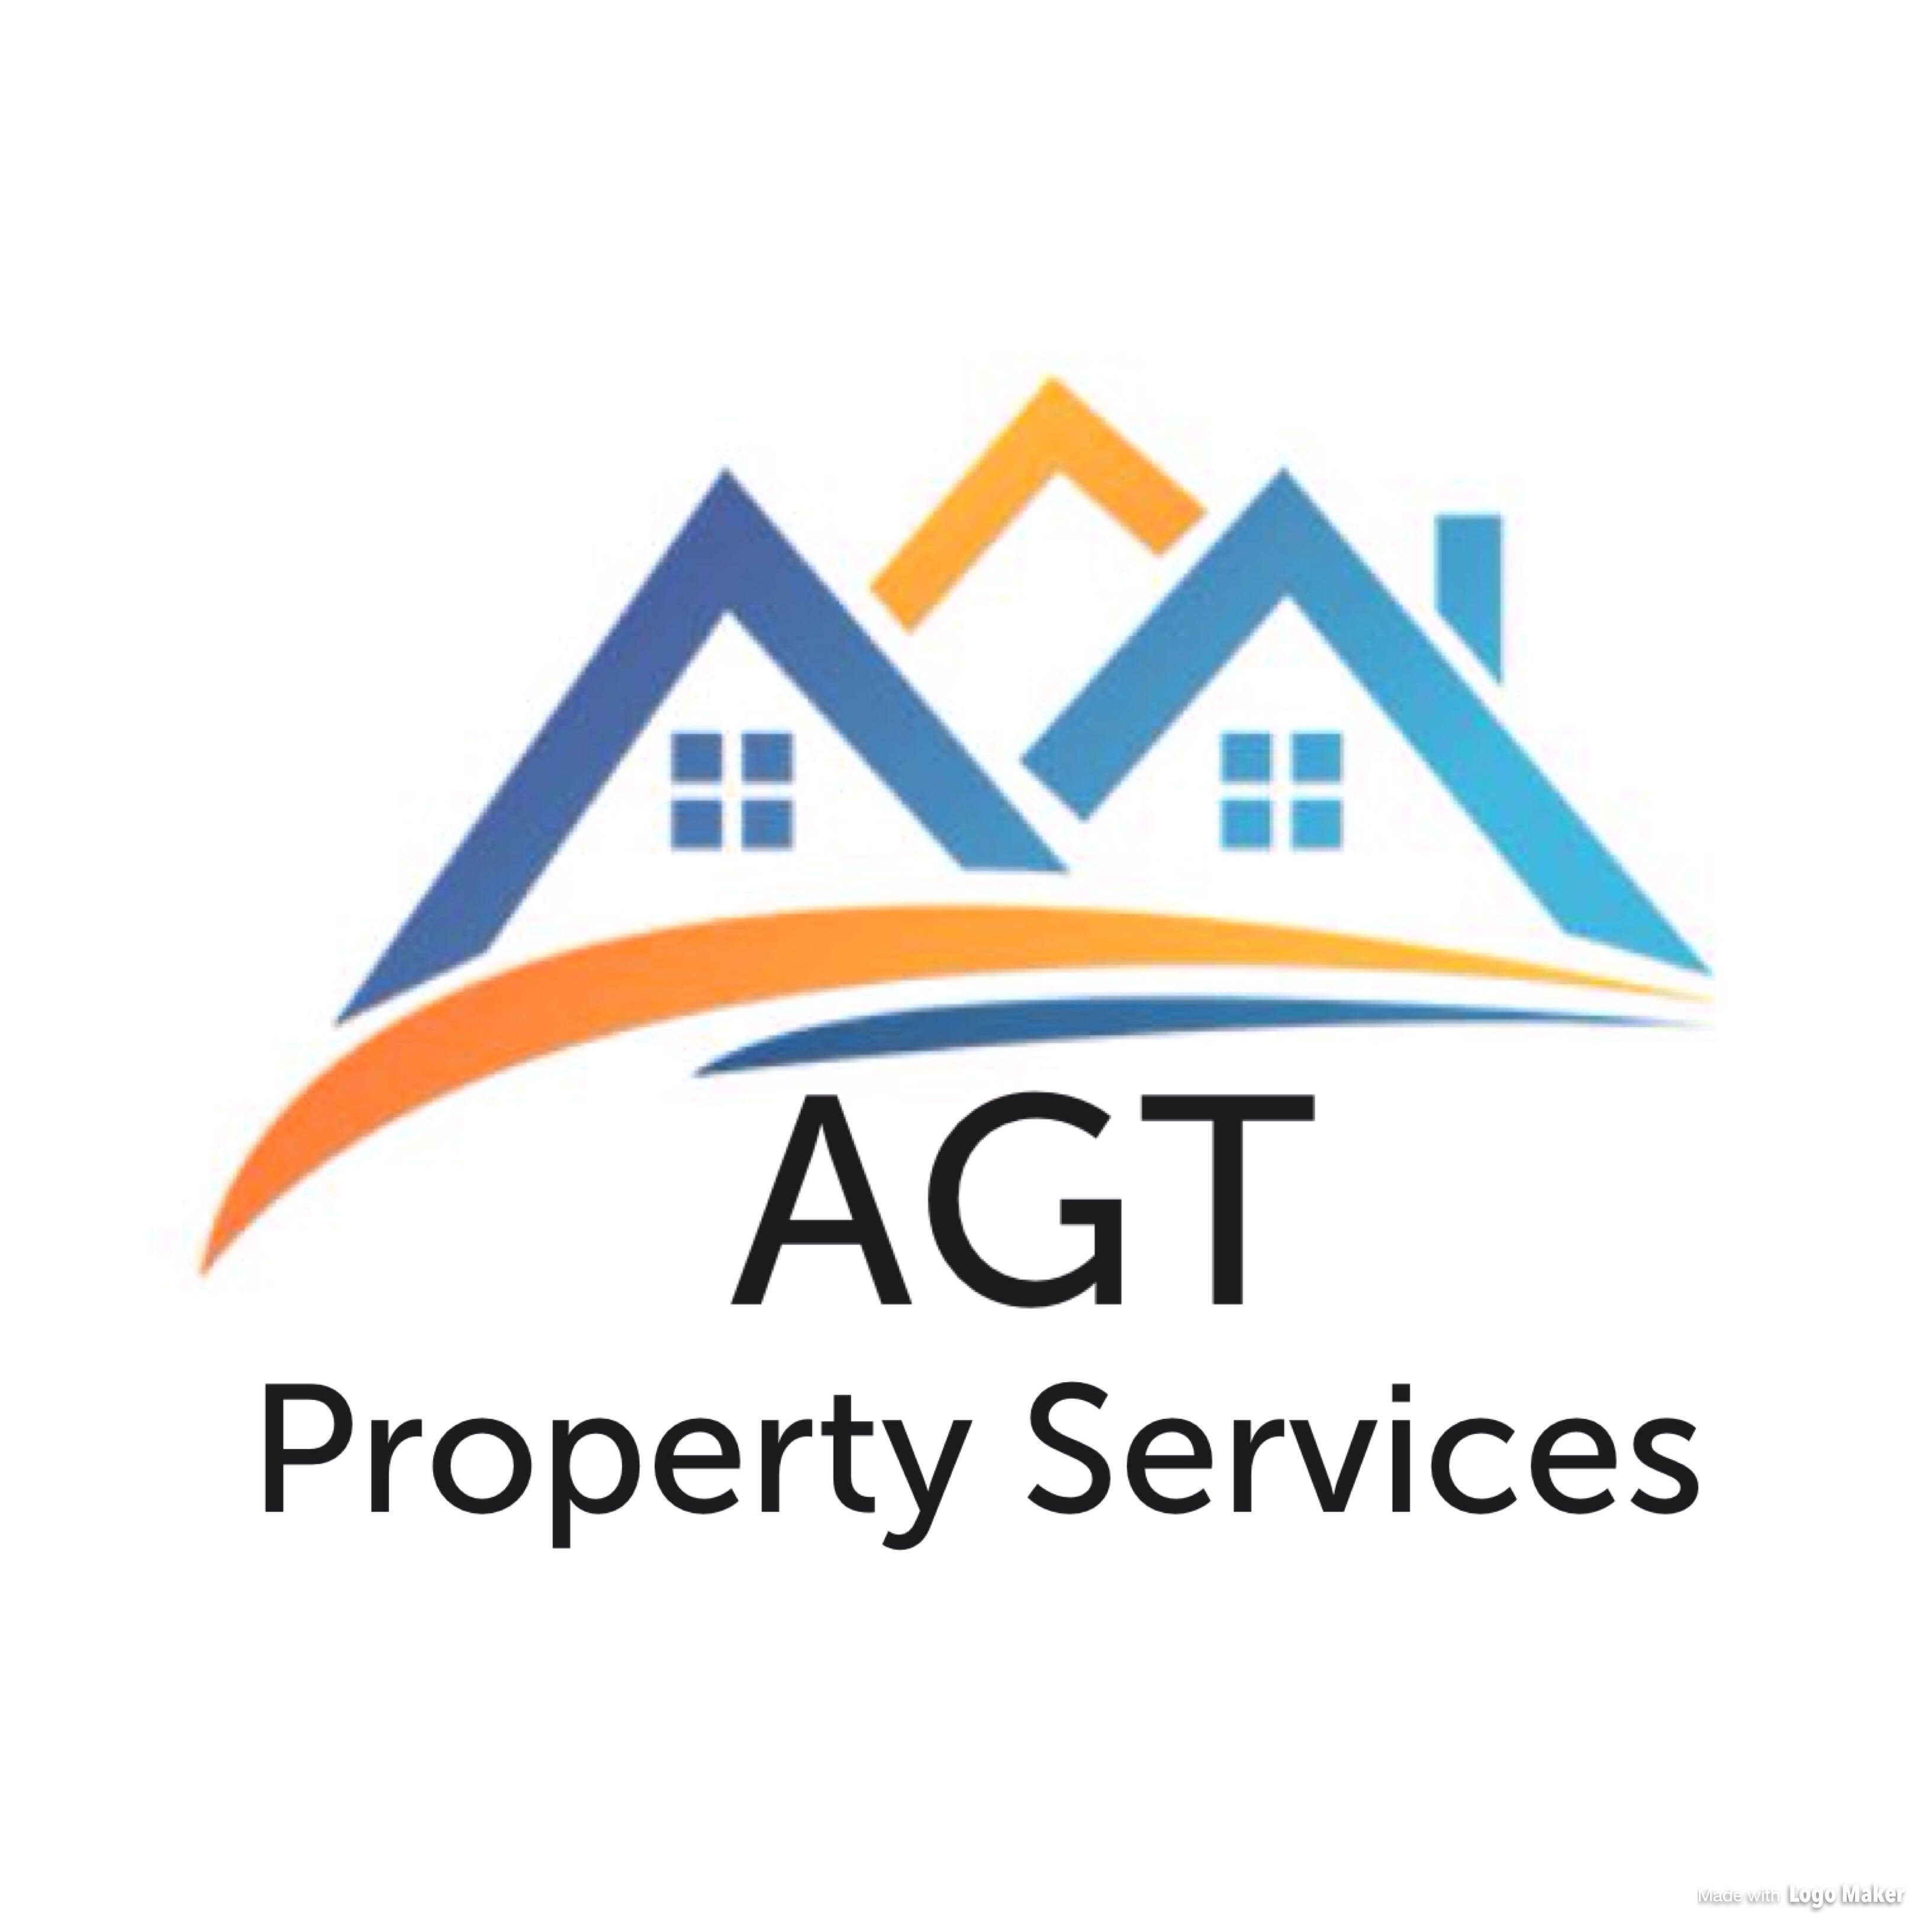 AGT Property Services